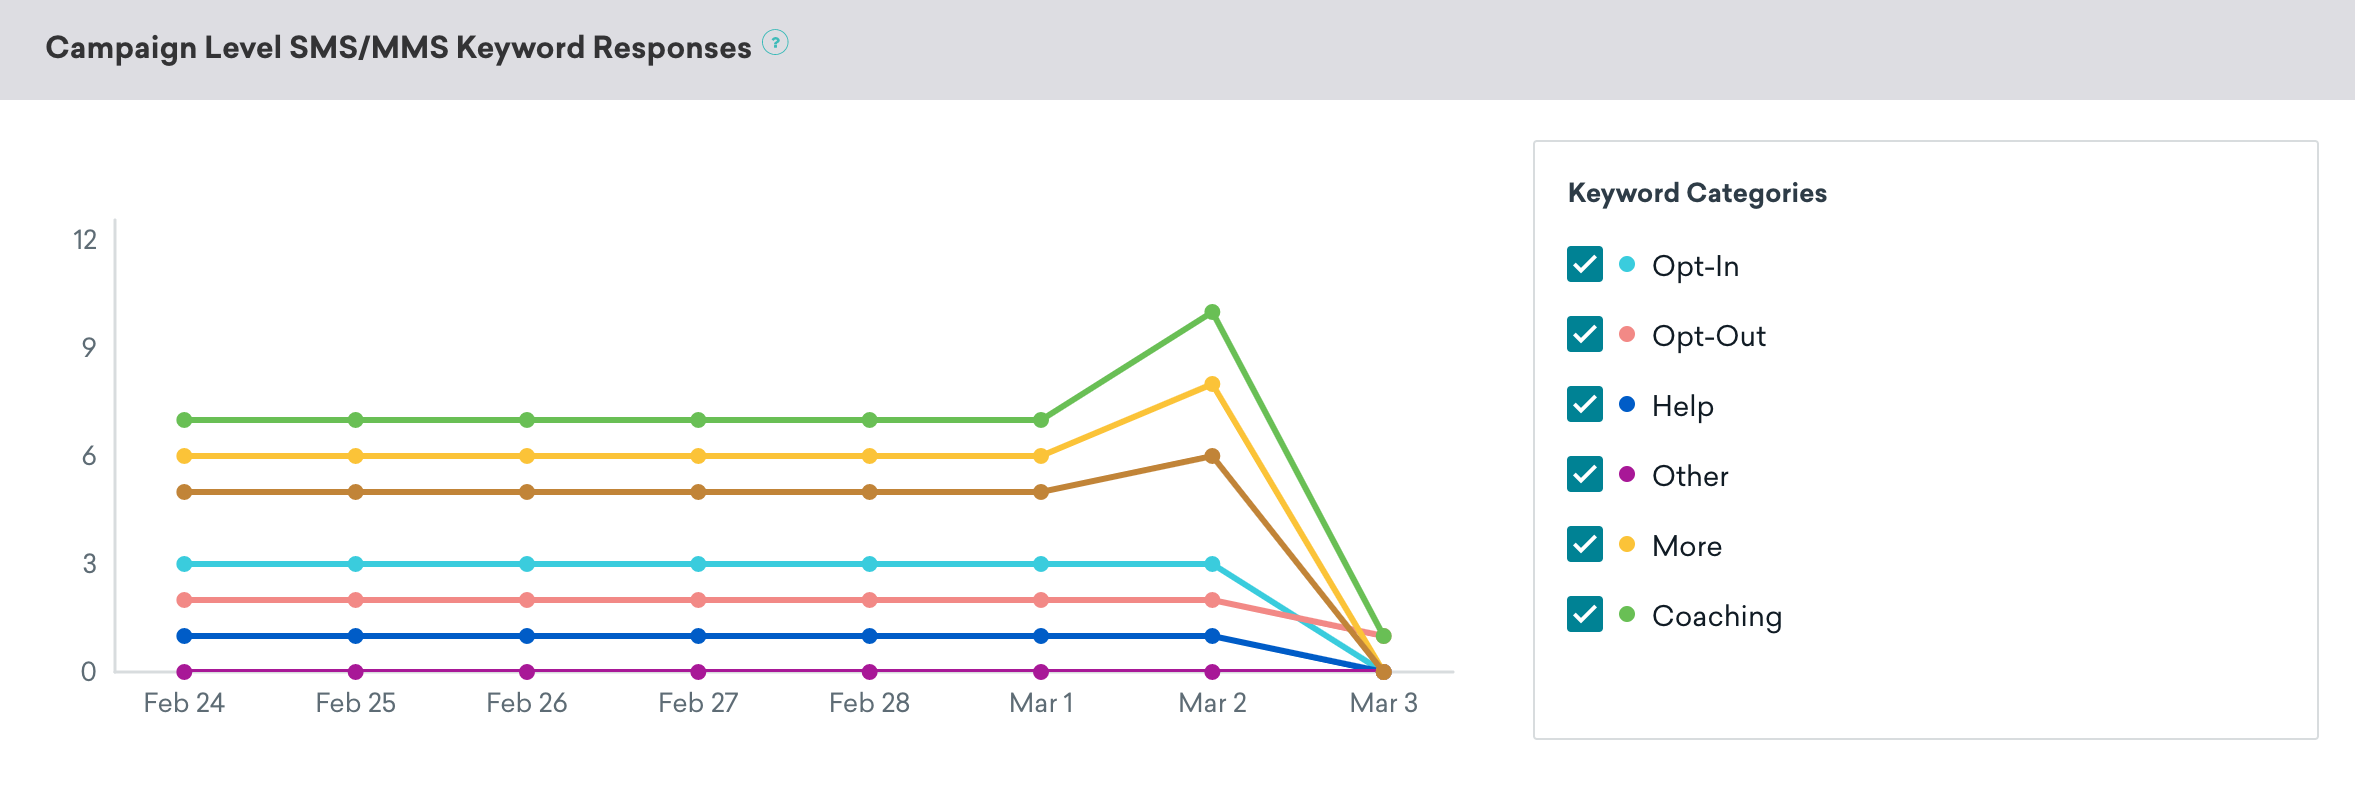 Campaign Level SMS/MMS Keyword Responses panel that includes a line graph of keyword distribution over time, and a Keywords Categories section with selected checkboxes for Opt-In, Opt-Out, Help, Other, More, and Coaching.